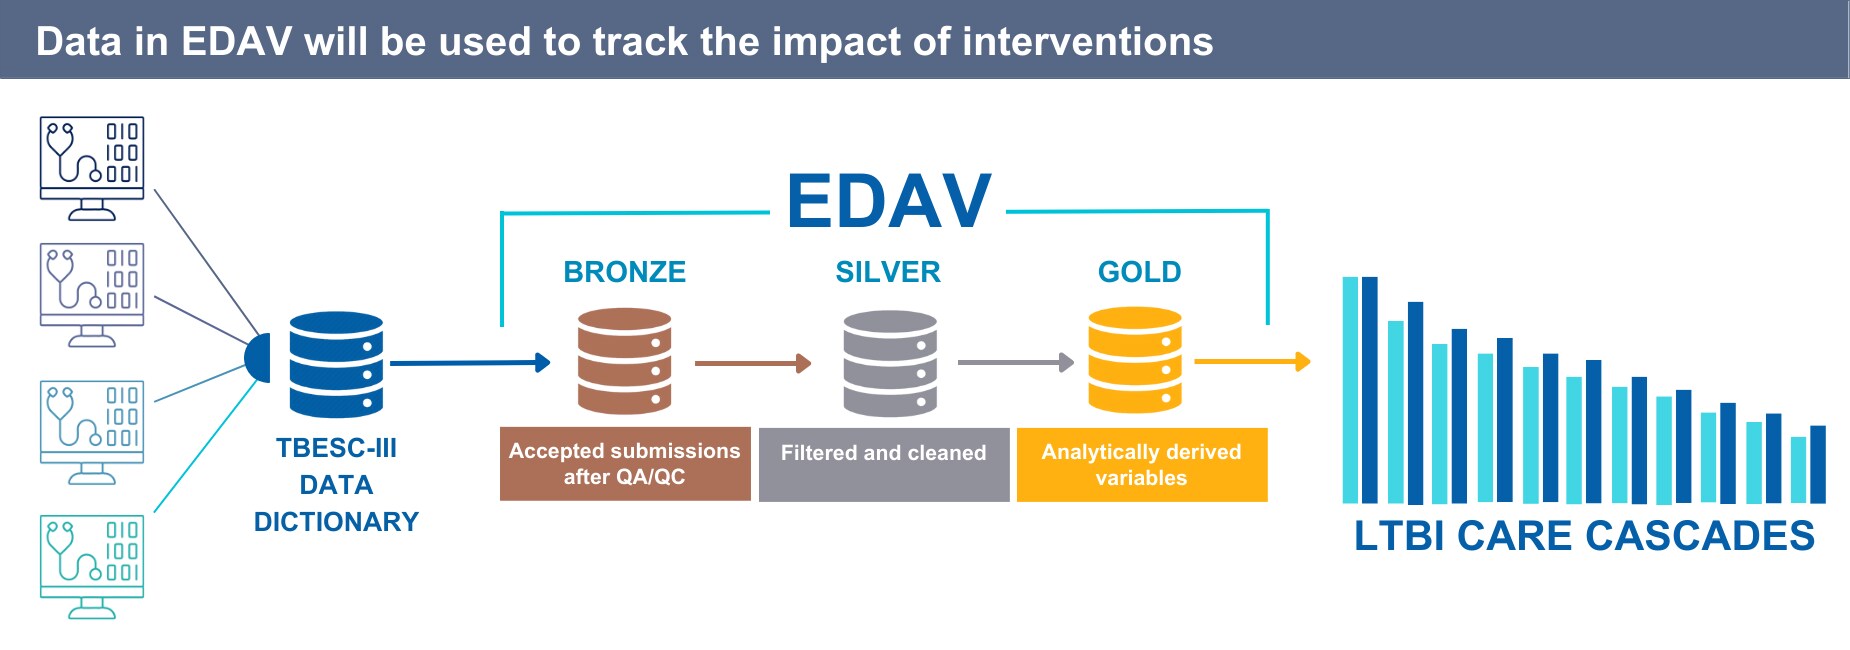 Data in EDAV will be used to track the impact of interventions